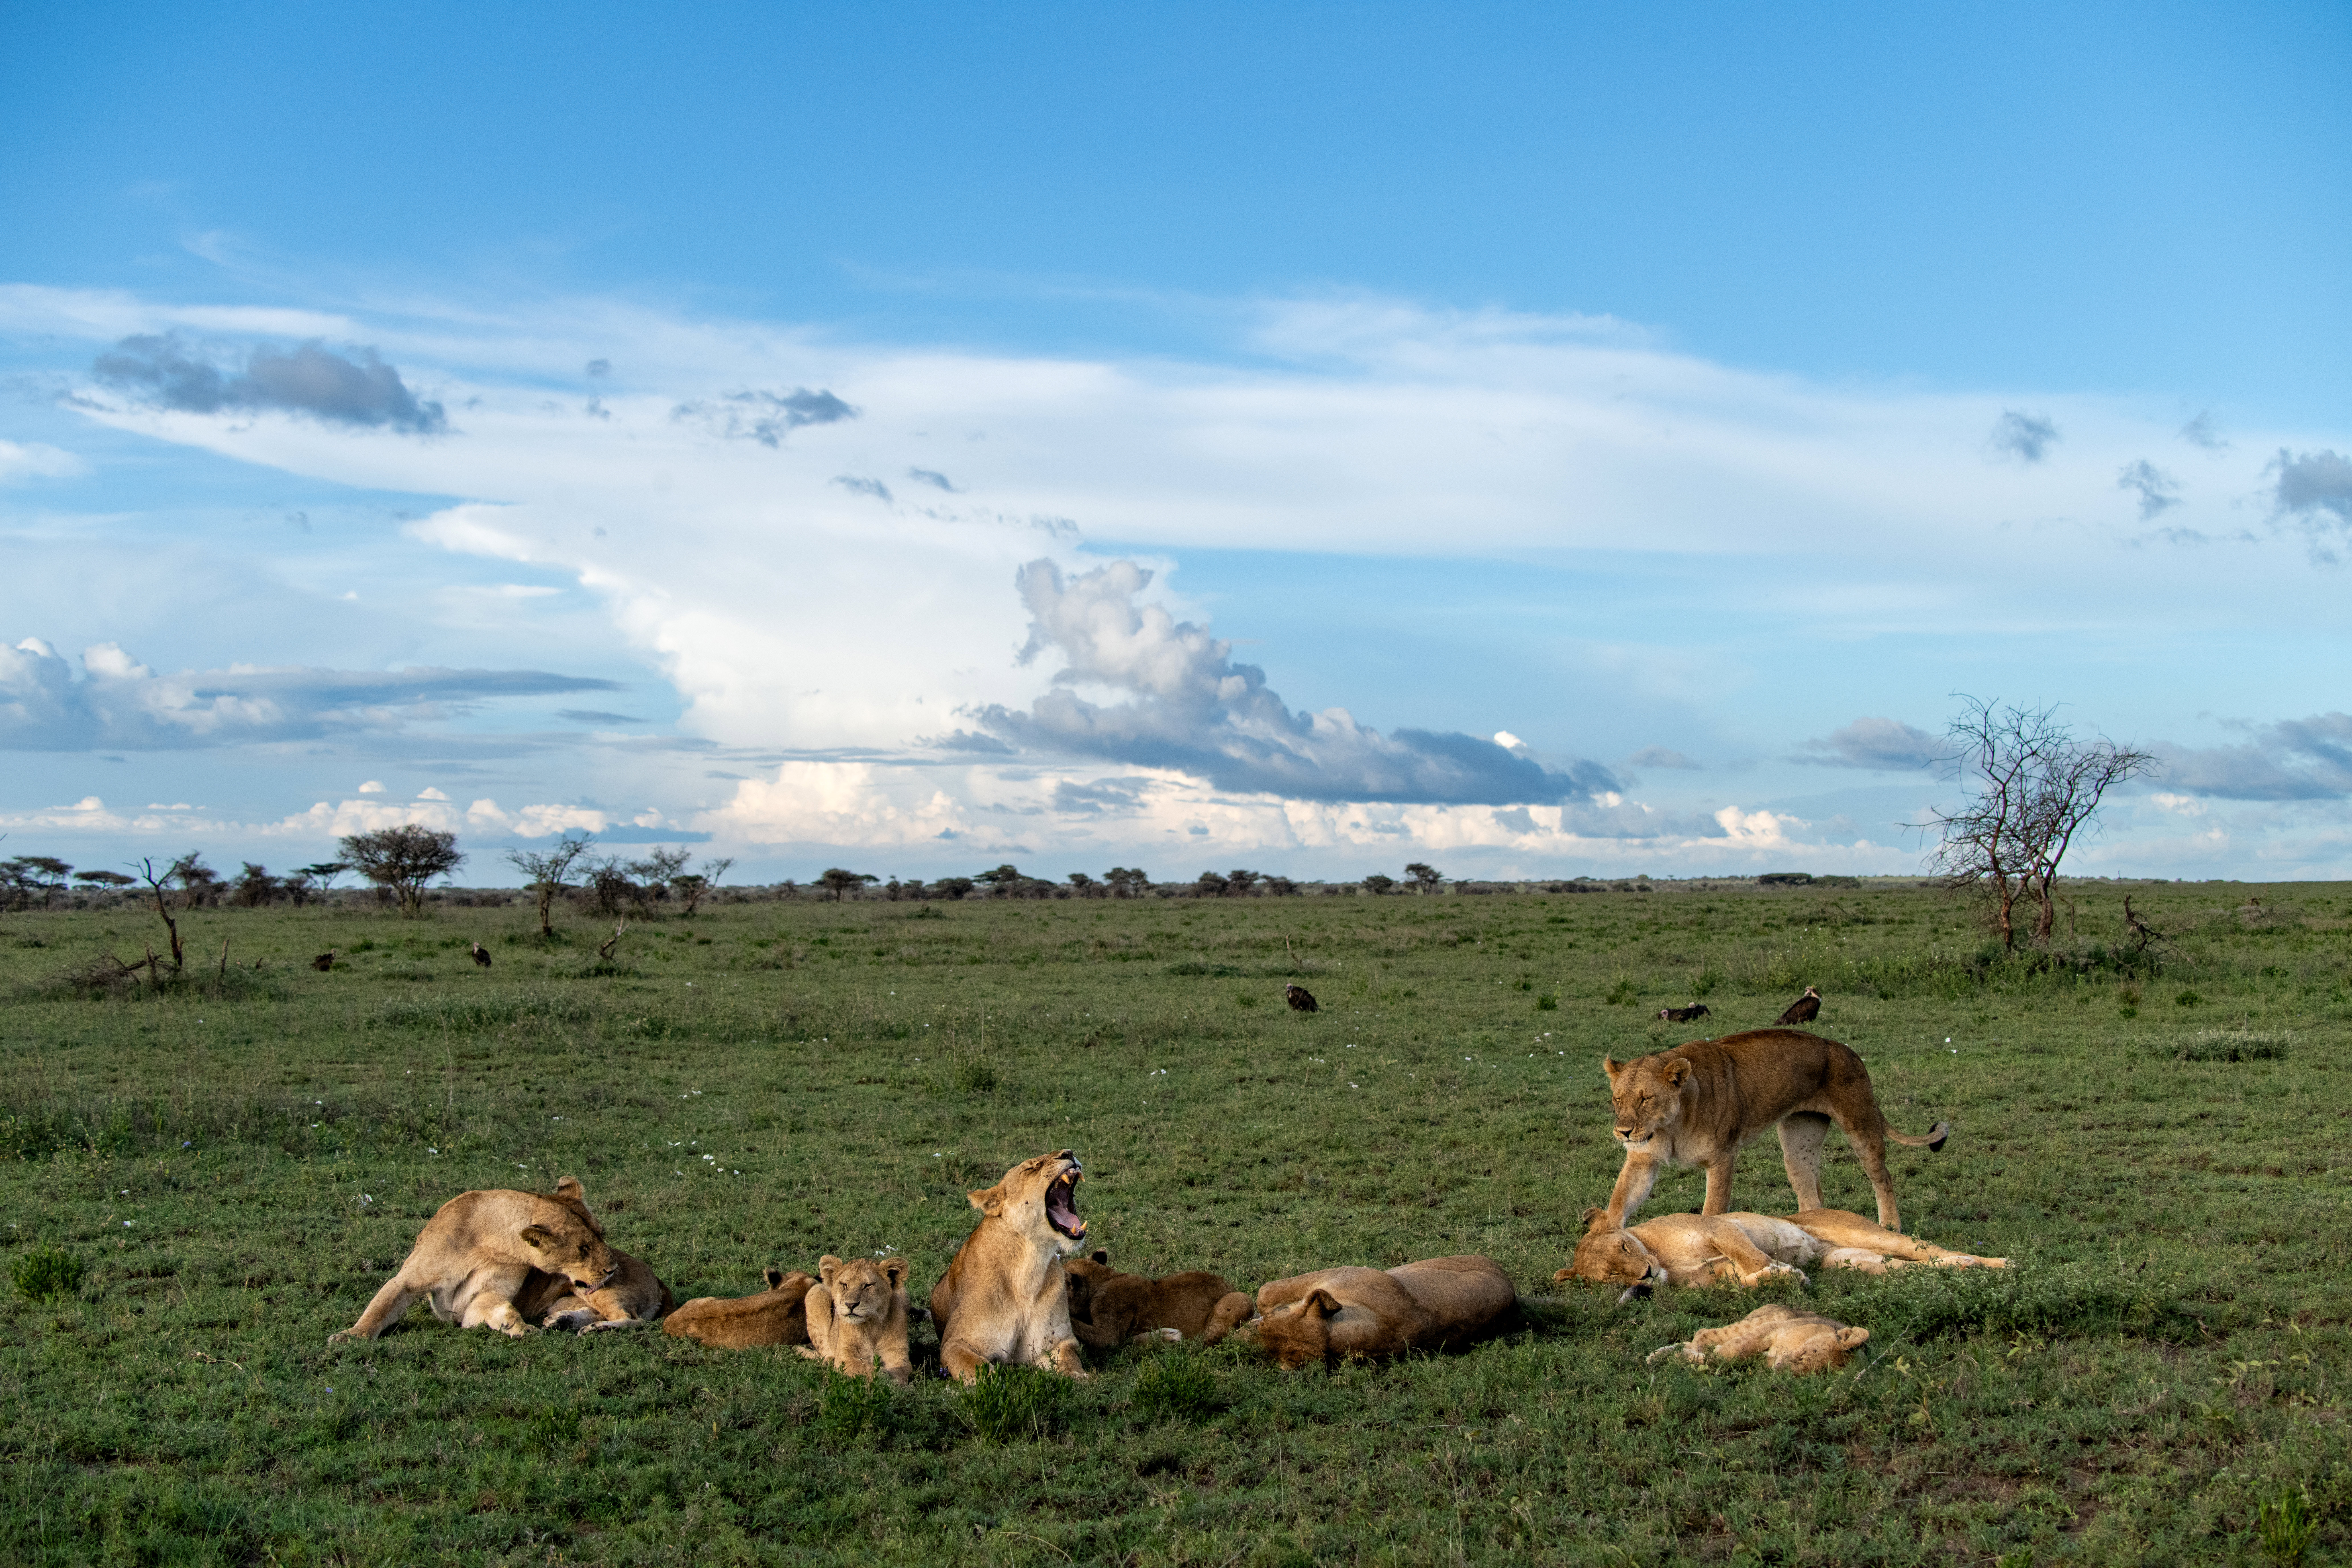 Lions laze in the lush grass of green season